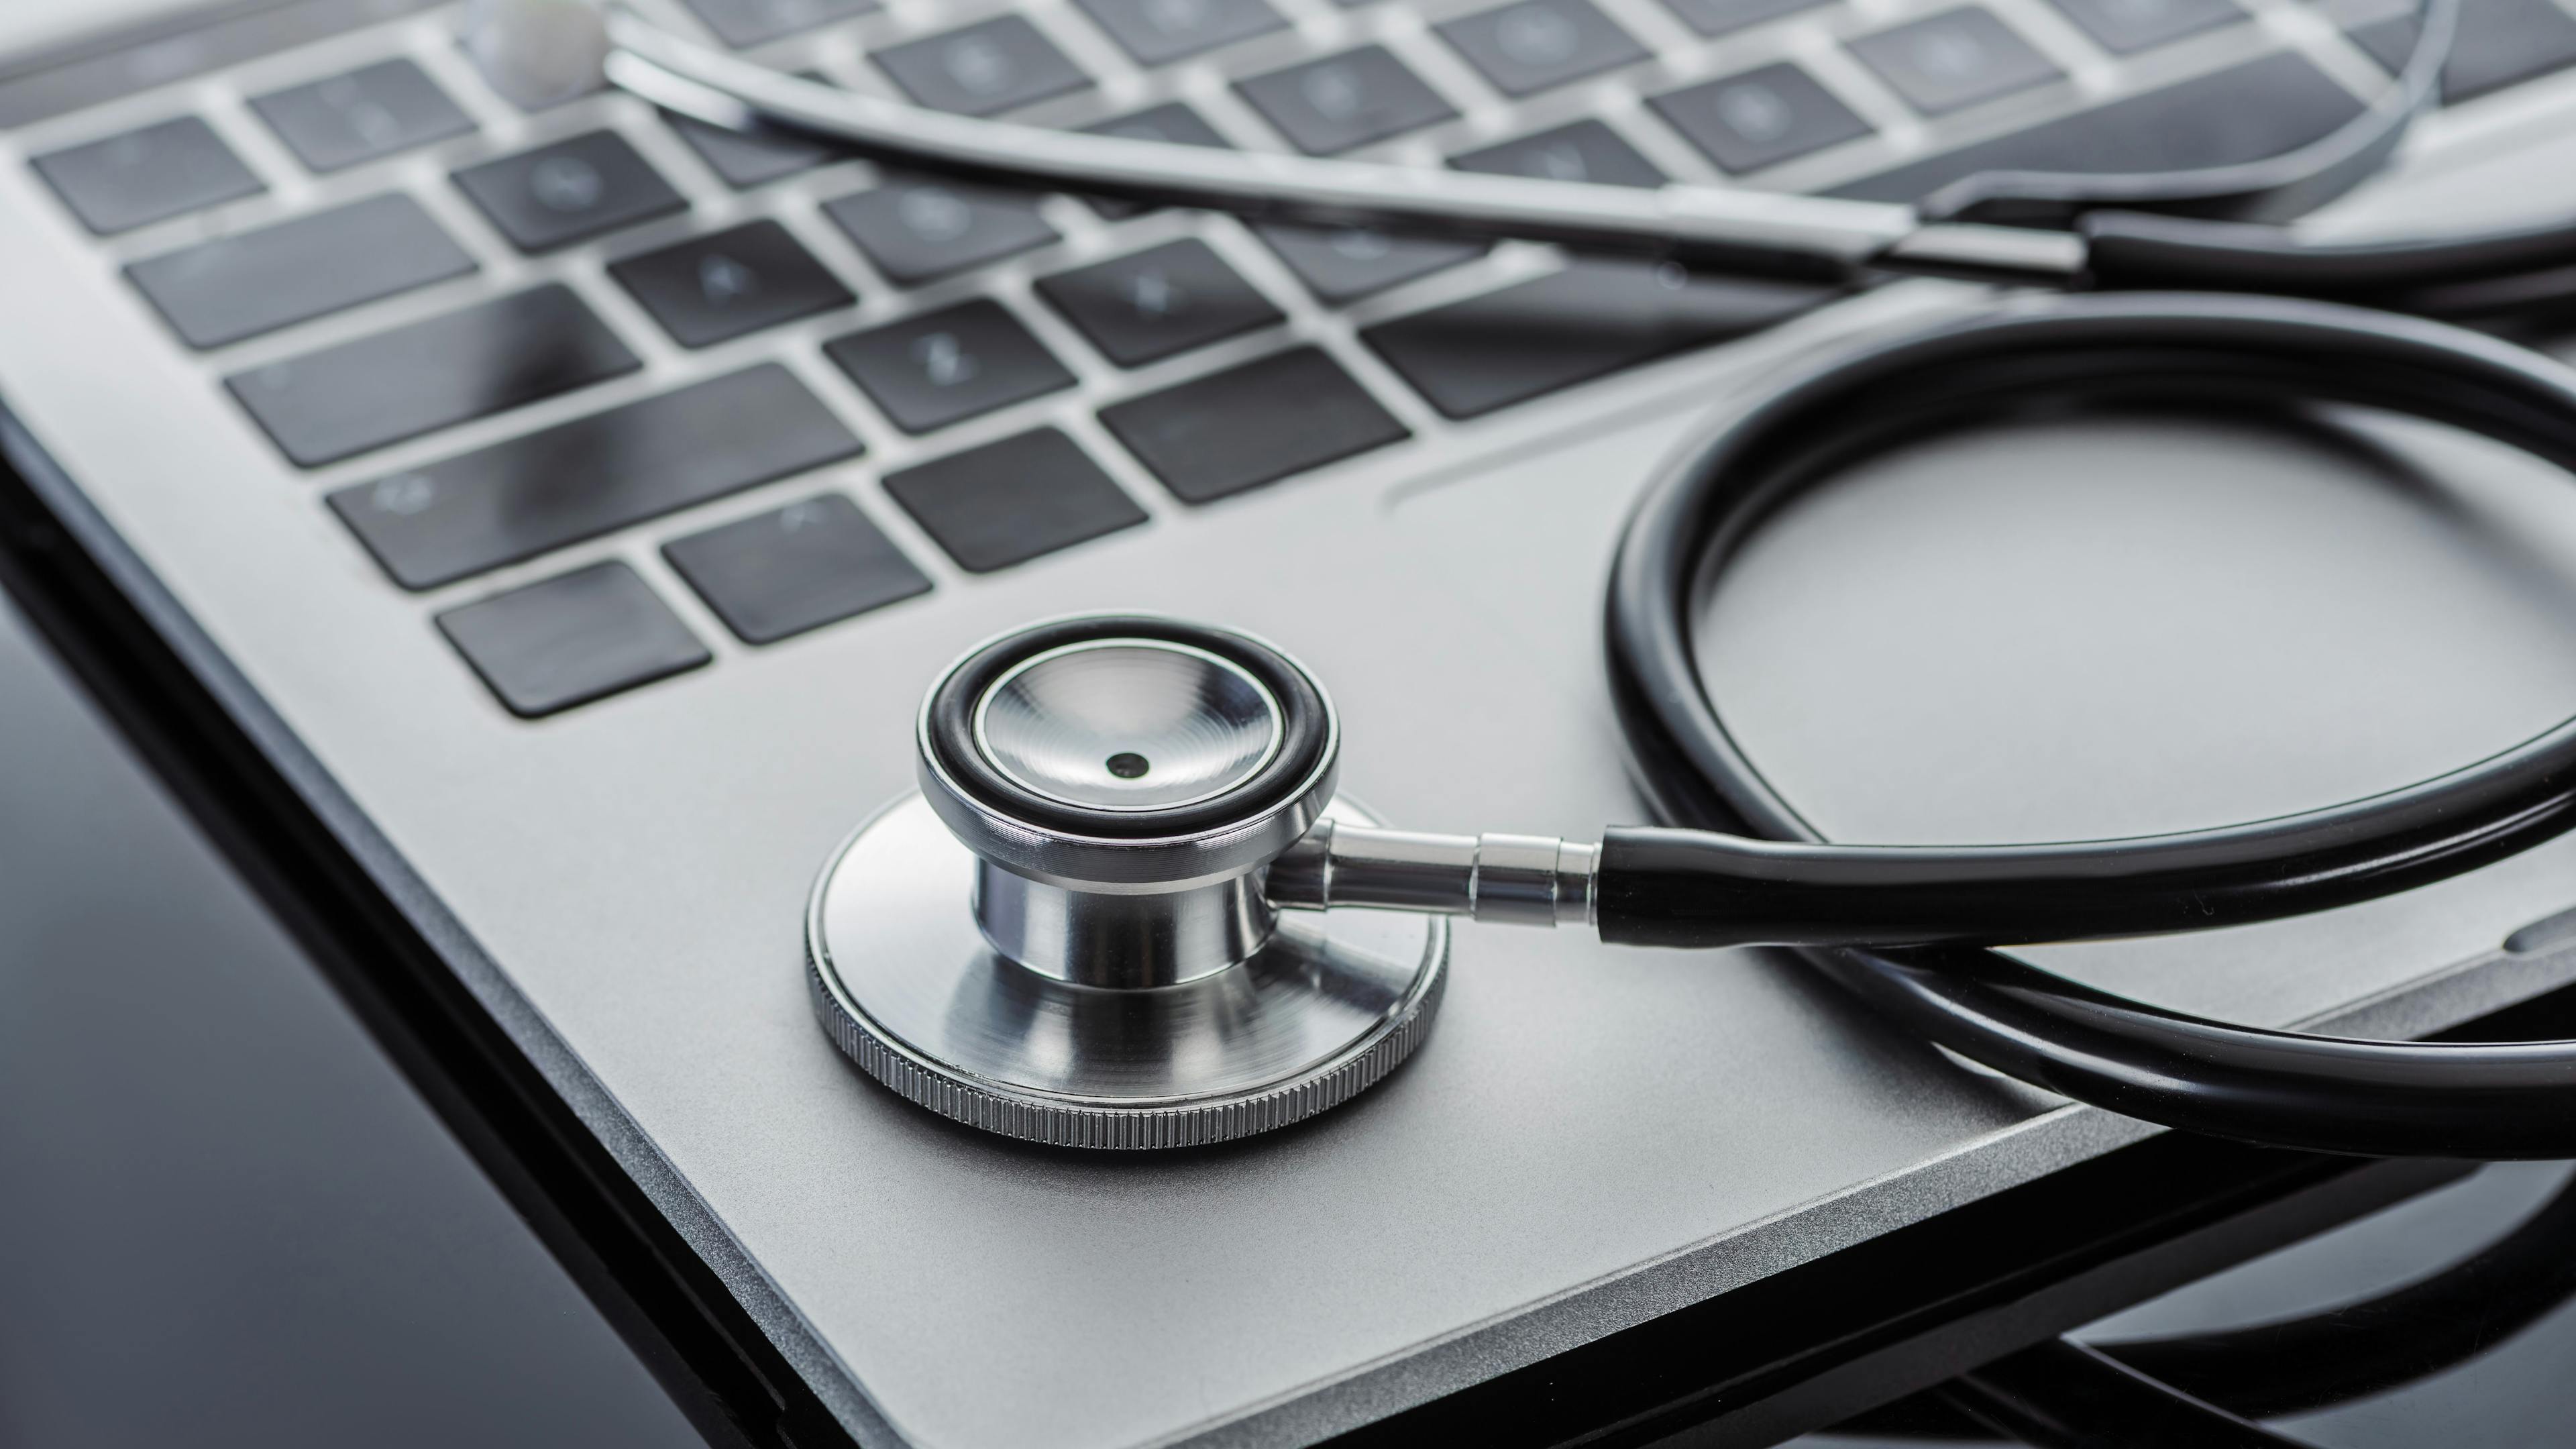 More than 88 million people have been affected by health data breaches this year